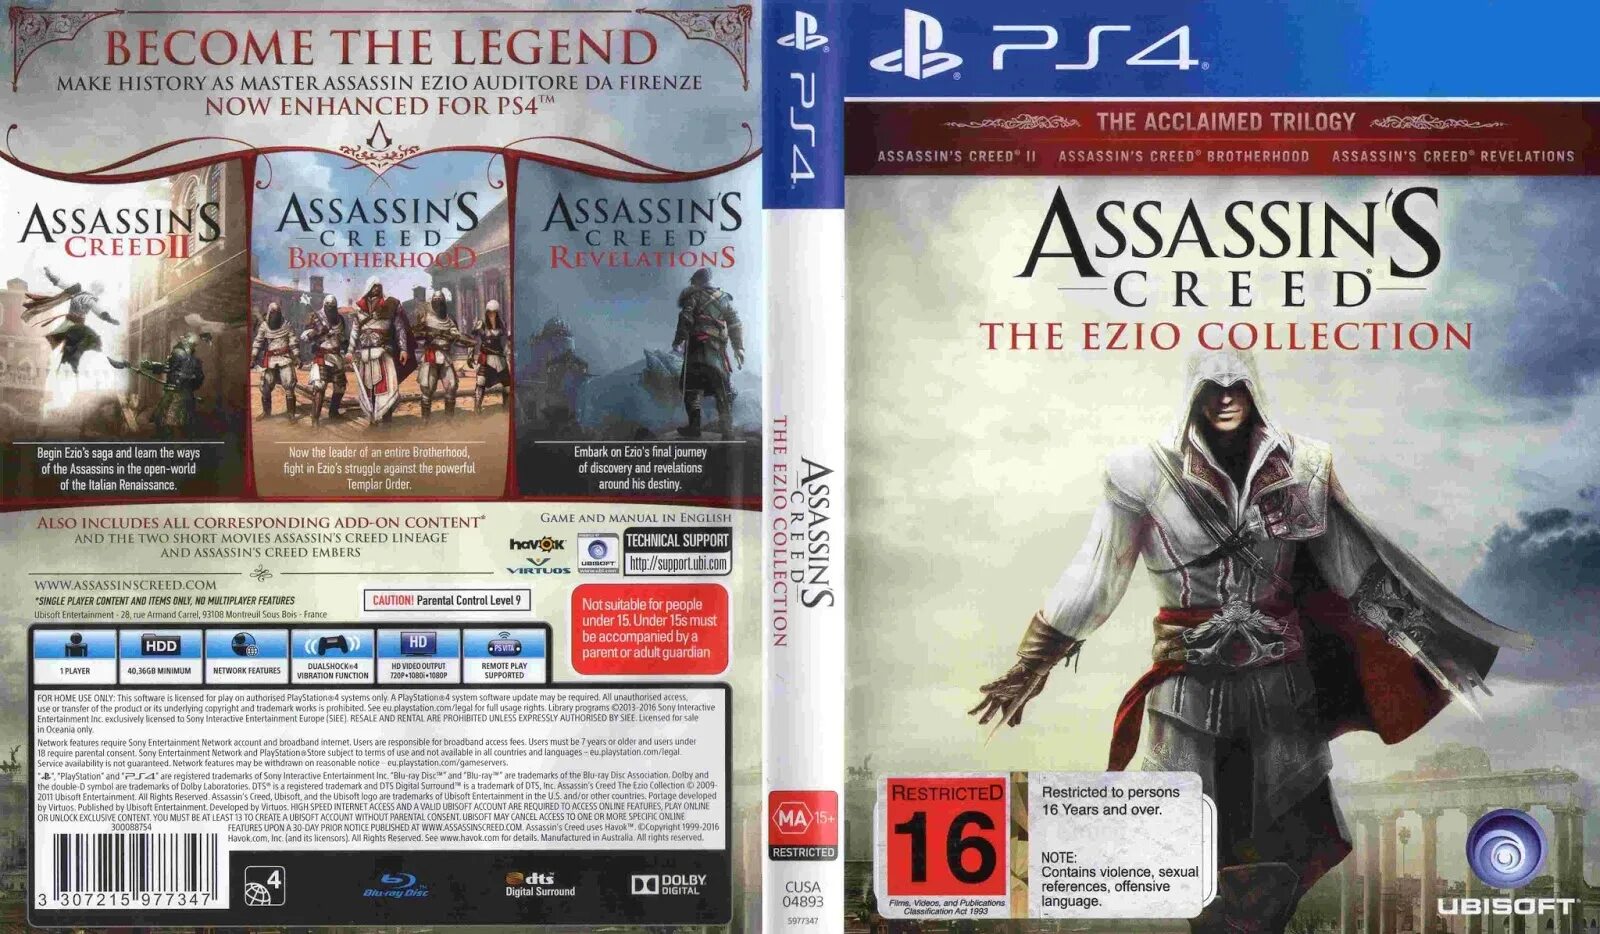 Ps4 диск Assassins Creed. Ассасин Крид диск на ПС 4. Assassin's Creed the Ezio ps4 диск. Assassin's Creed Ezio collection ps4 диск. Assassin s ezio collection